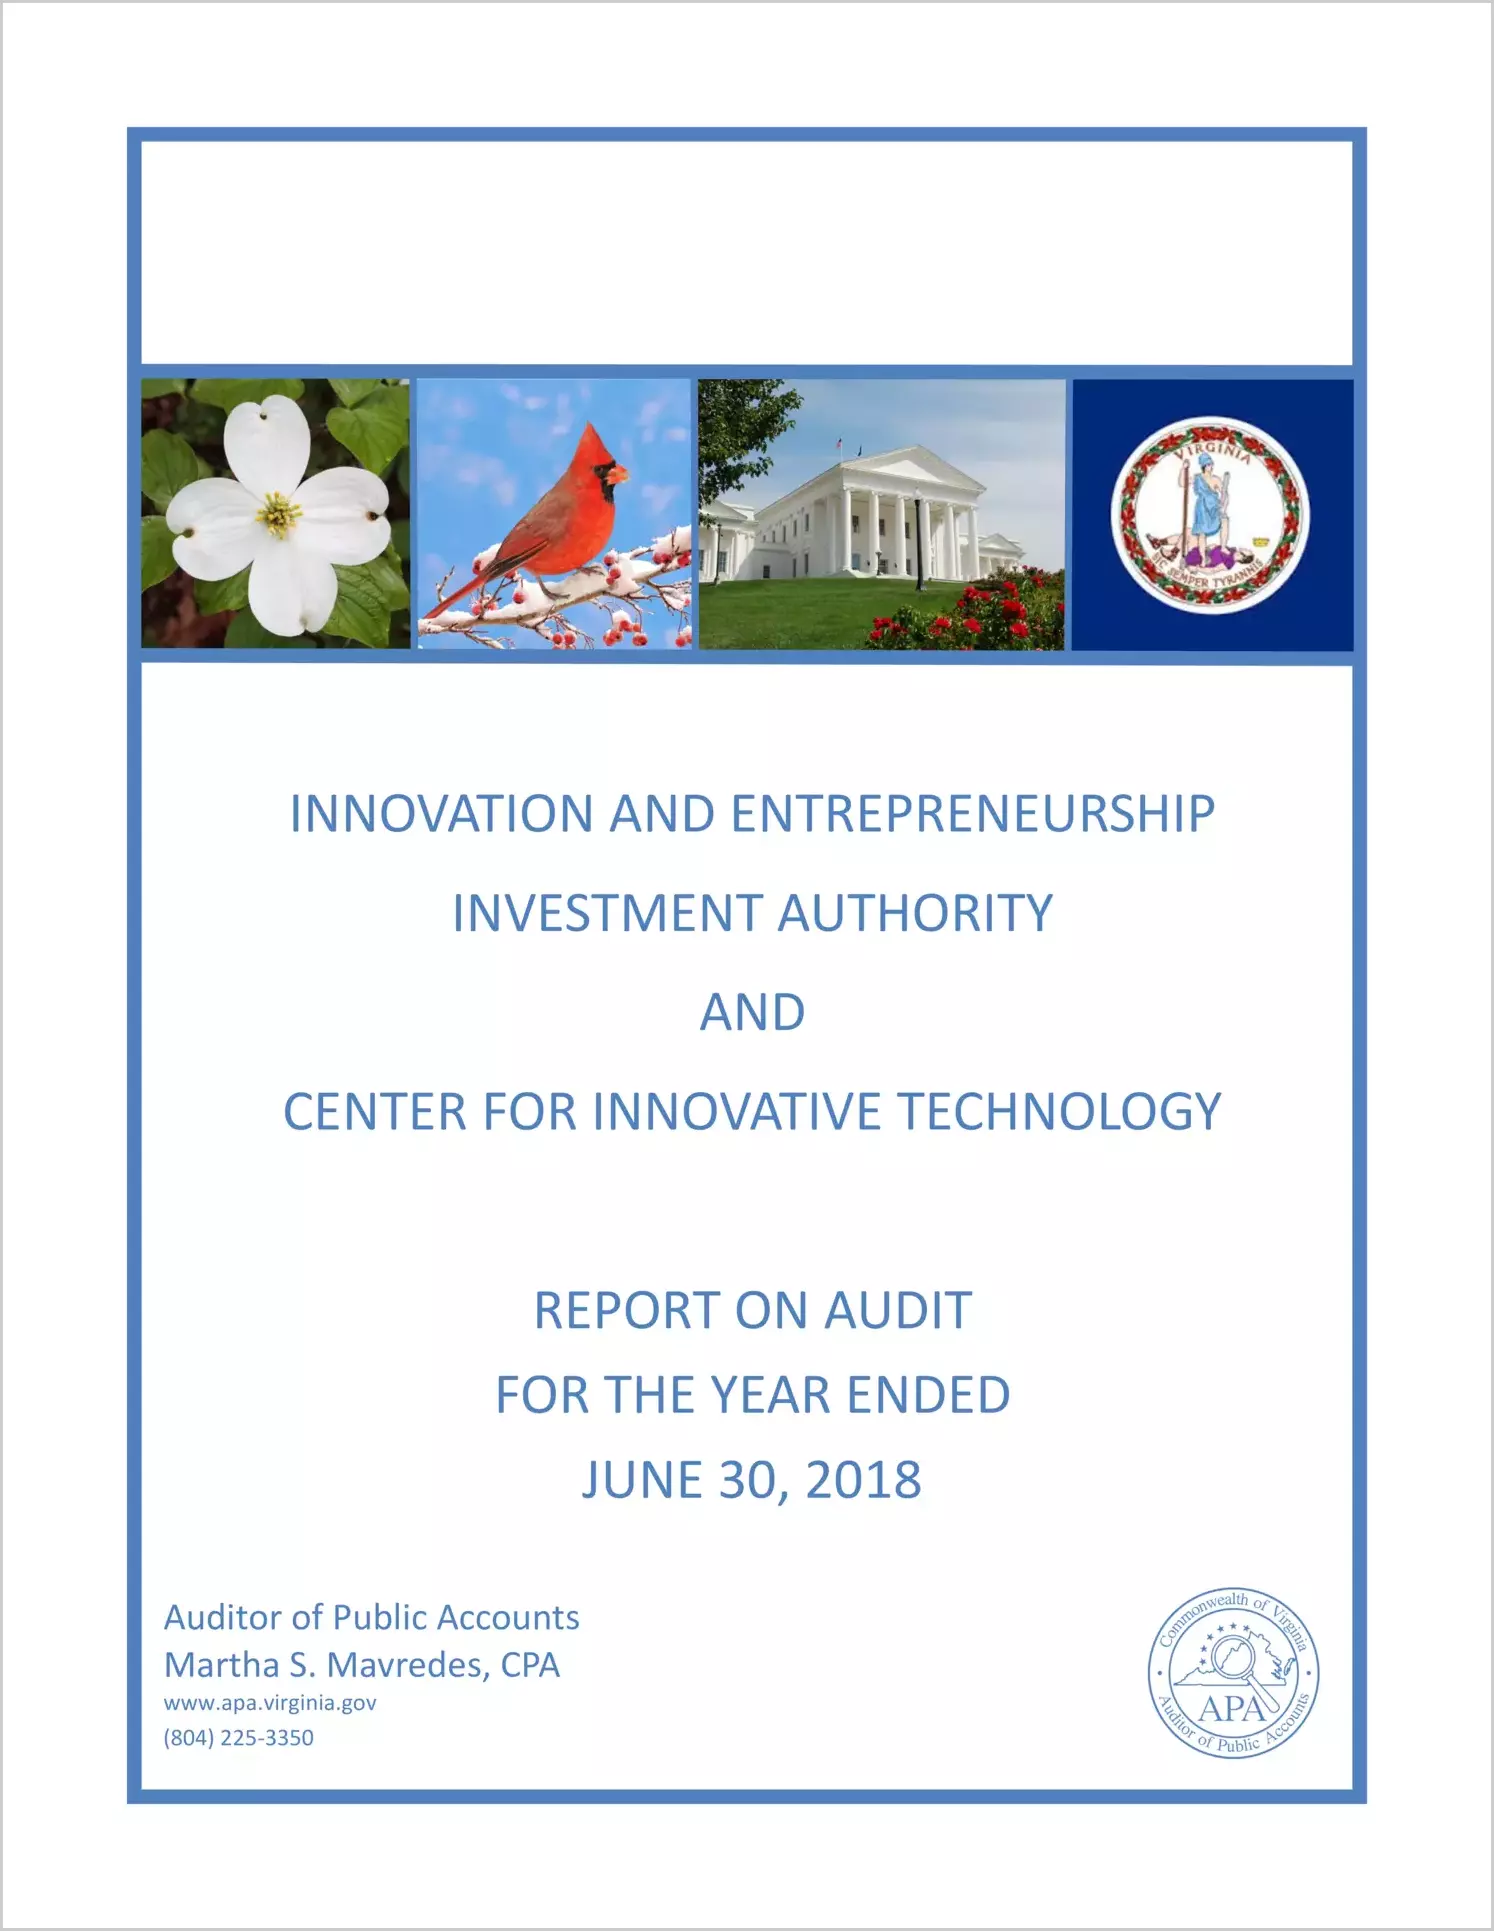 Innovation and Entrepreneurship Investment Authority and Center for Innovative Technology for the year ended June 30, 2018